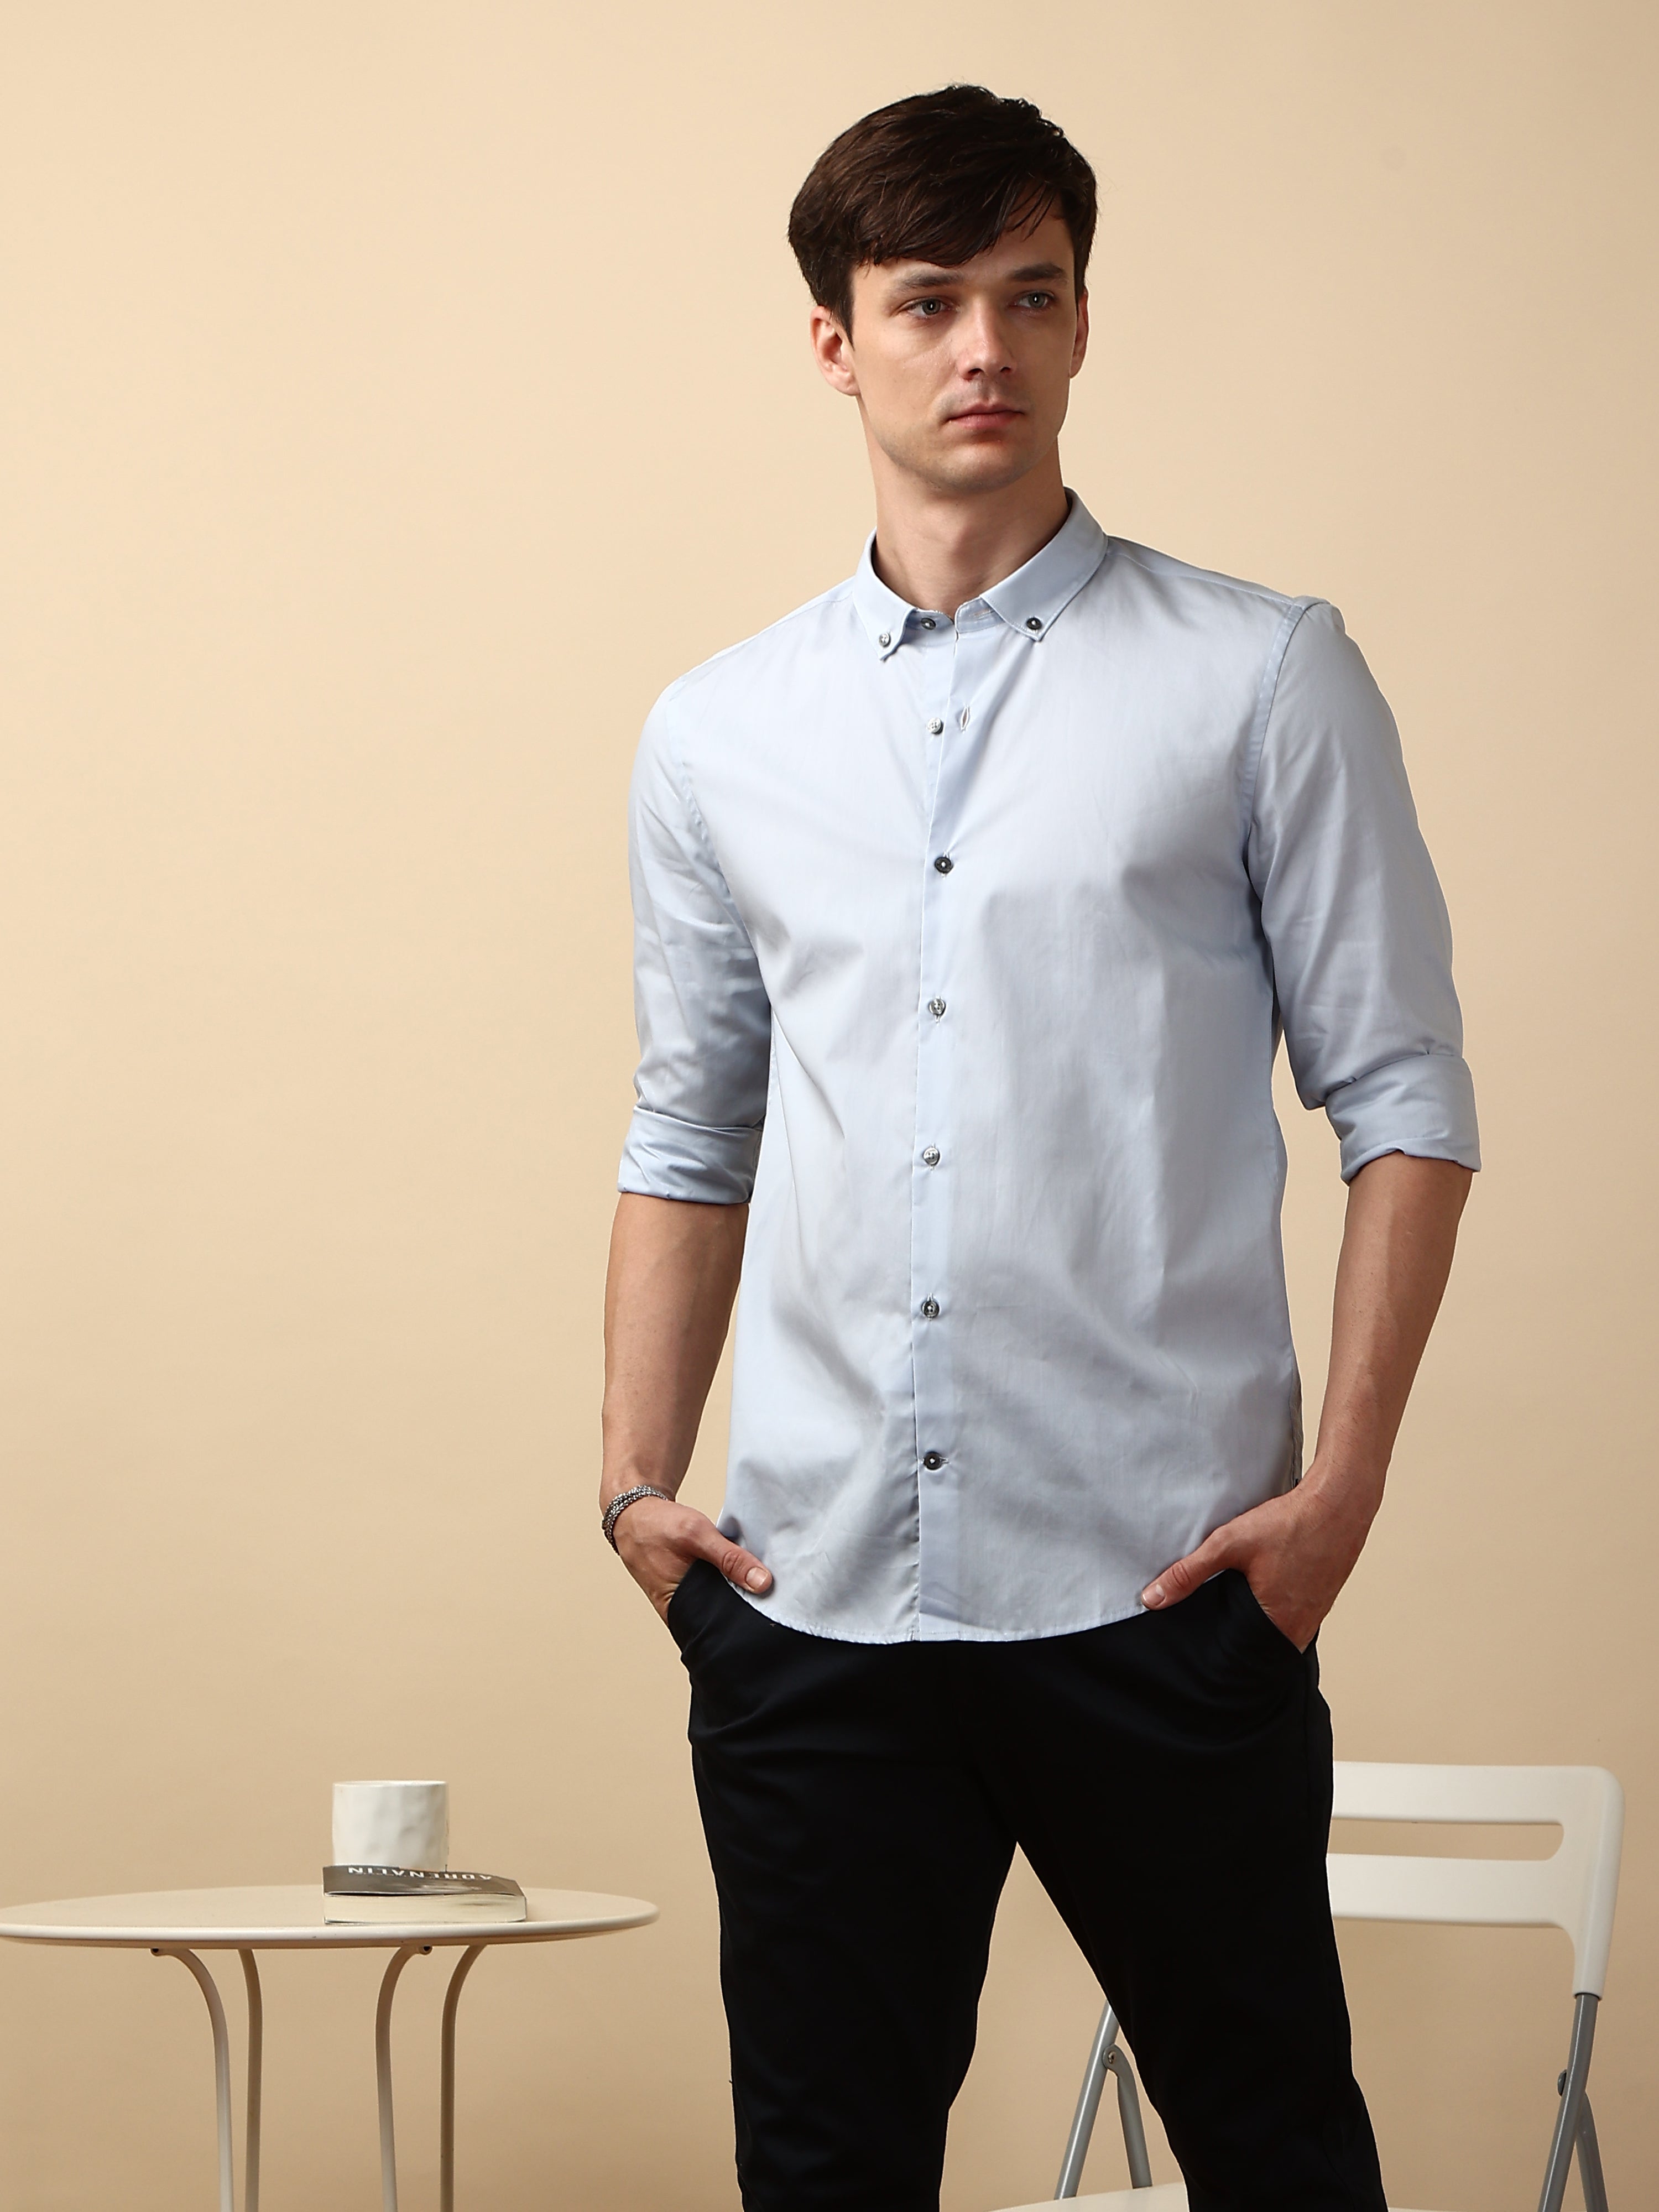 Snow Blue Semi casual full sleeve shirt shop online at Estilocus. • Full-sleeve solid shirt• Cut and sew placket• Regular collar• Double button square cuff.• Curved hemline• Finest quality sewing• Machine wash care• Suitable to wear with all types of bott